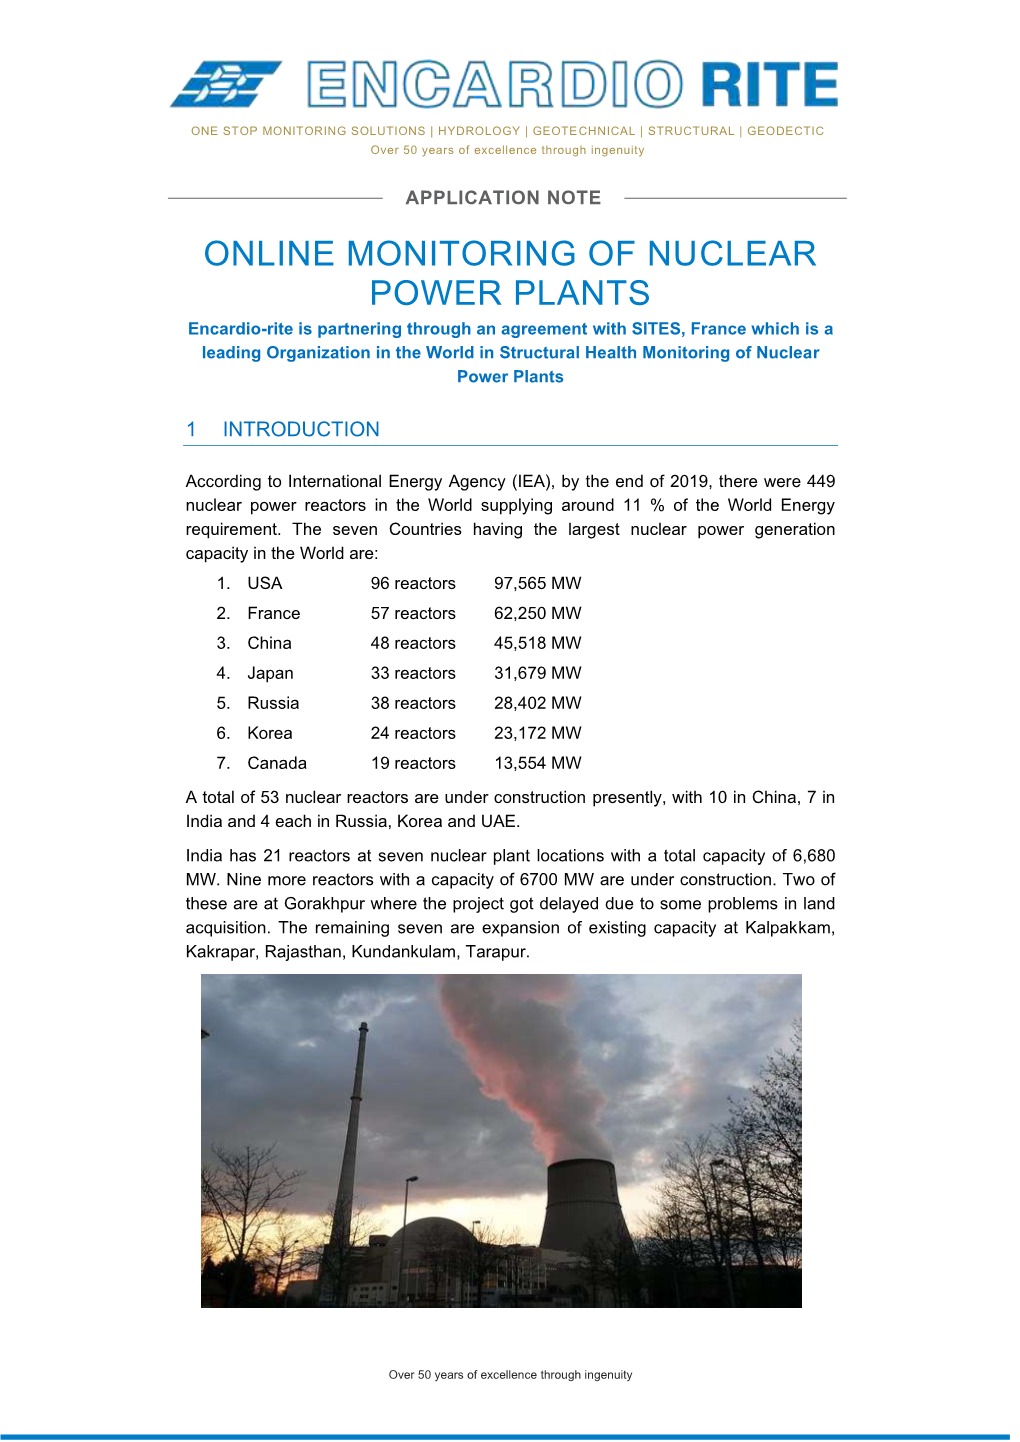 Online Monitoring of Nuclear Power Plants